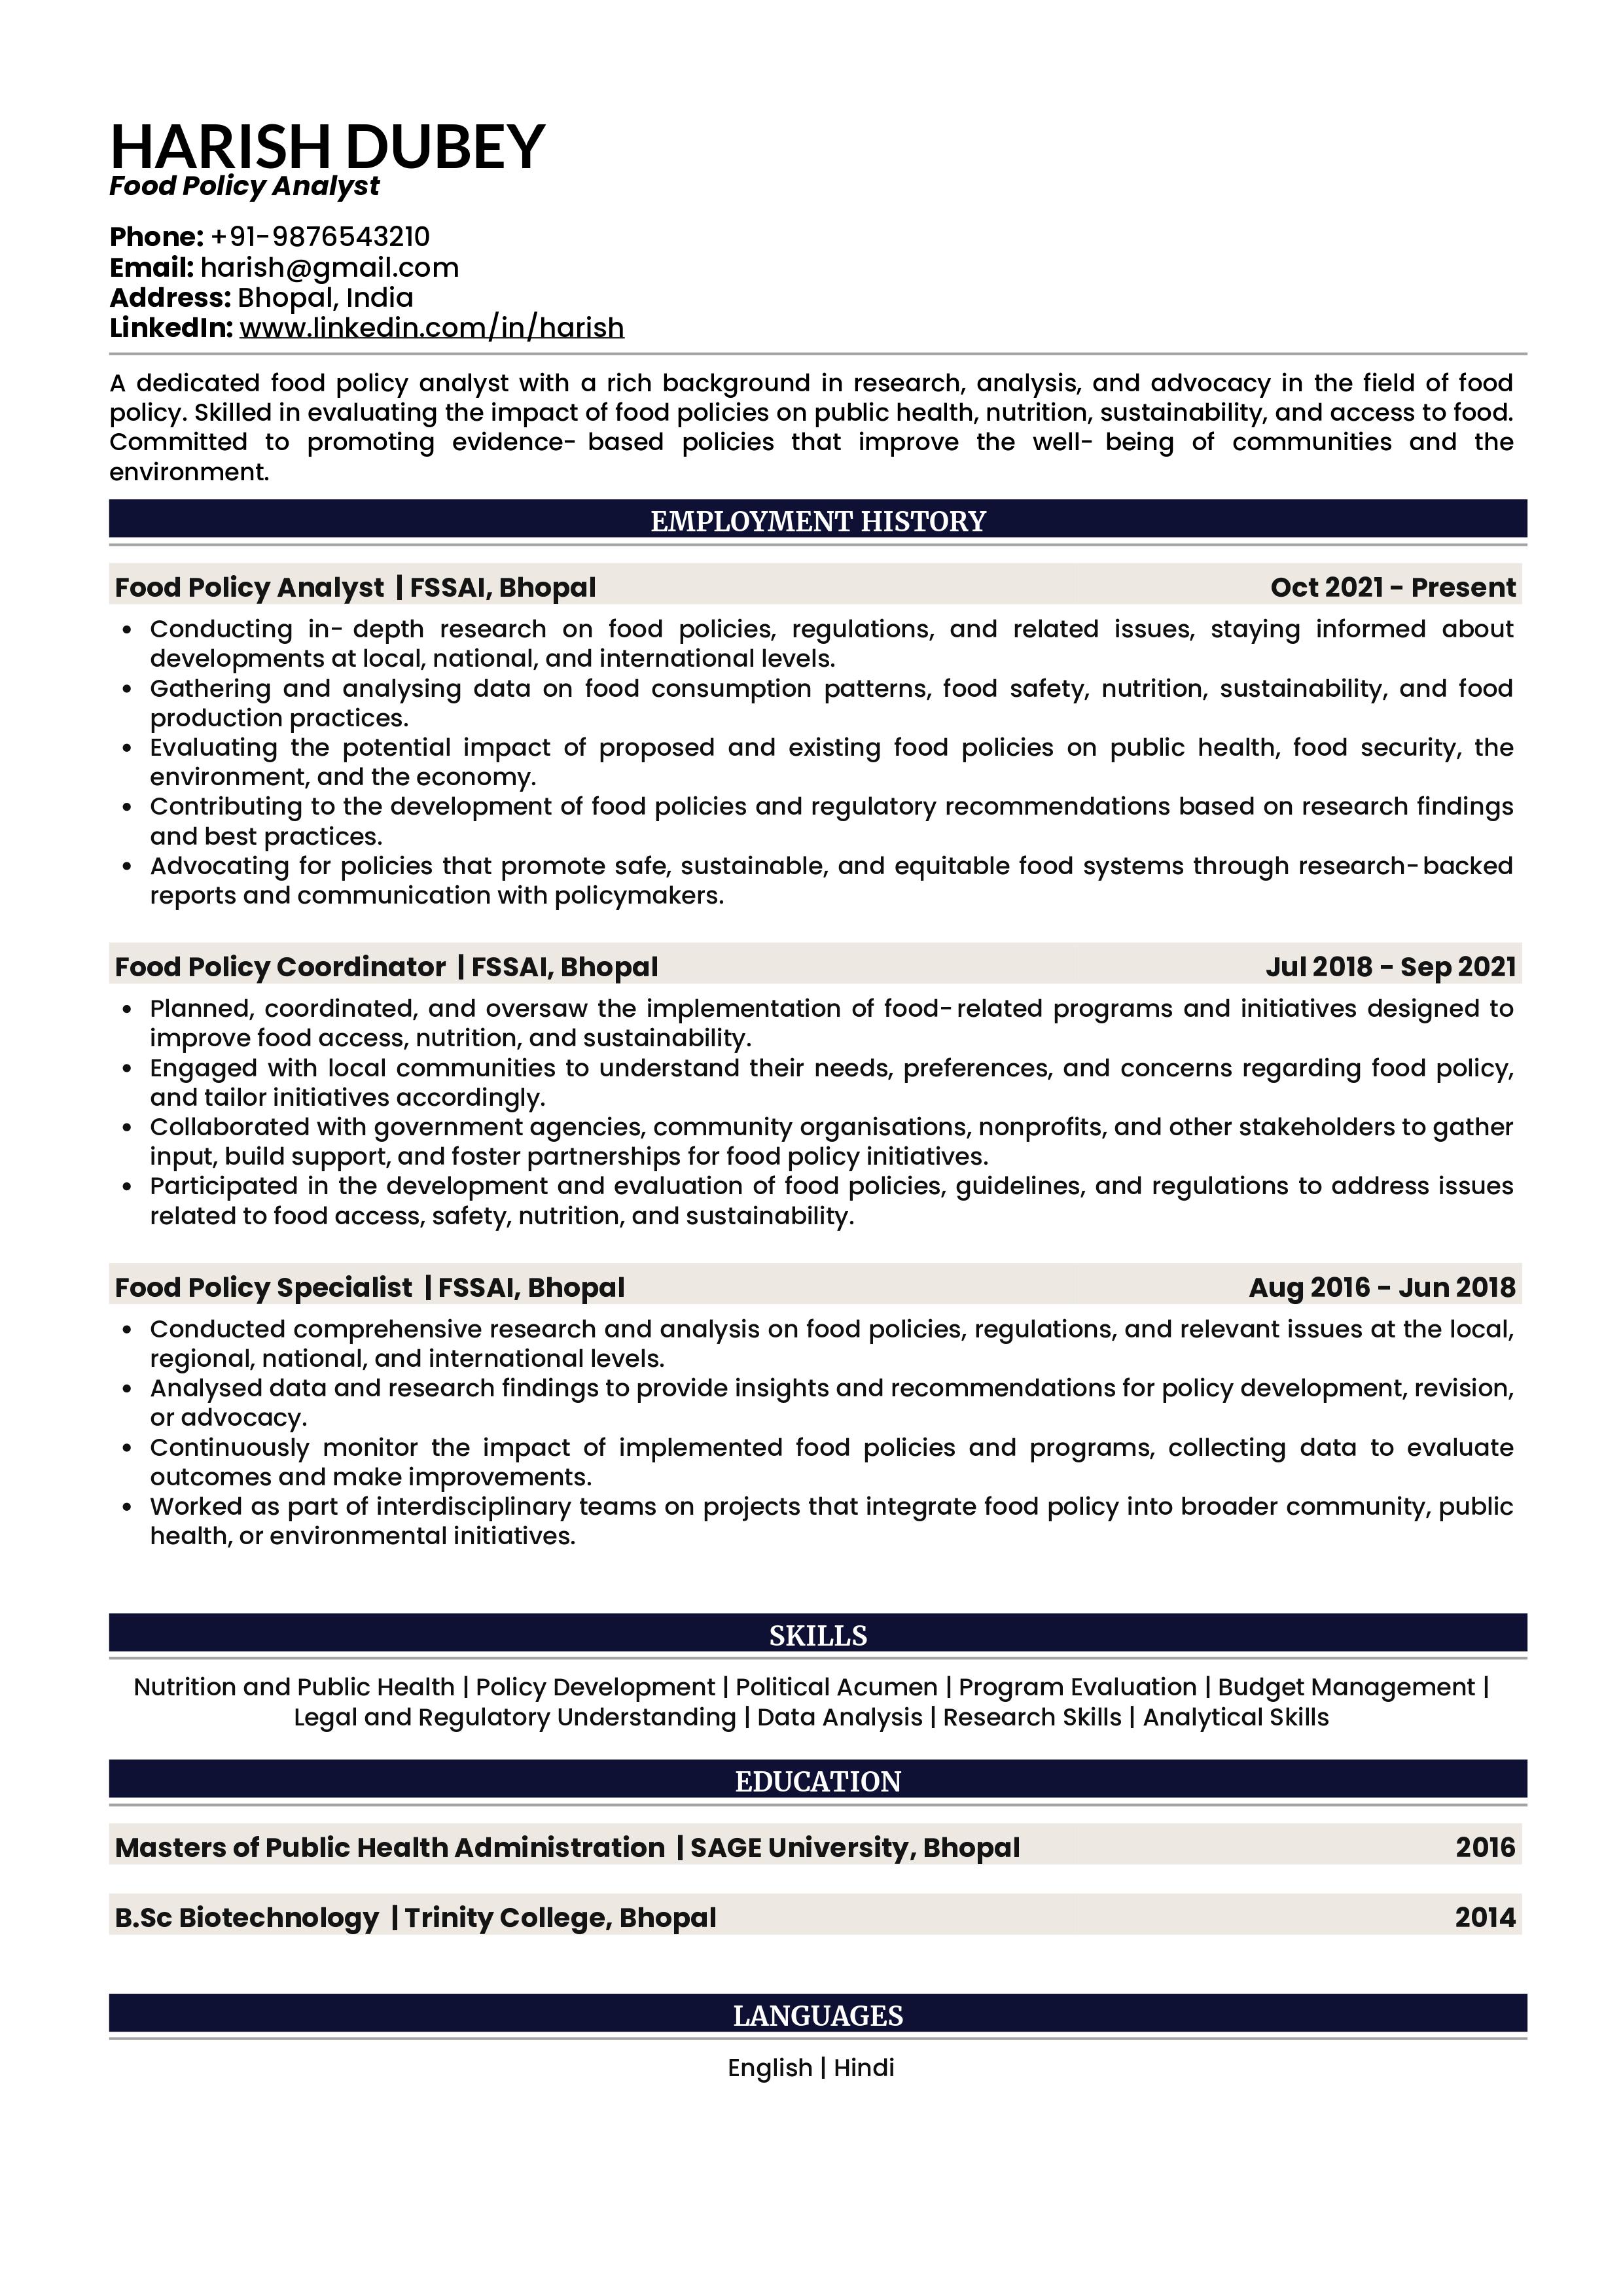 Sample Resume of Food Policy Analyst | Free Resume Templates & Samples on Resumod.co